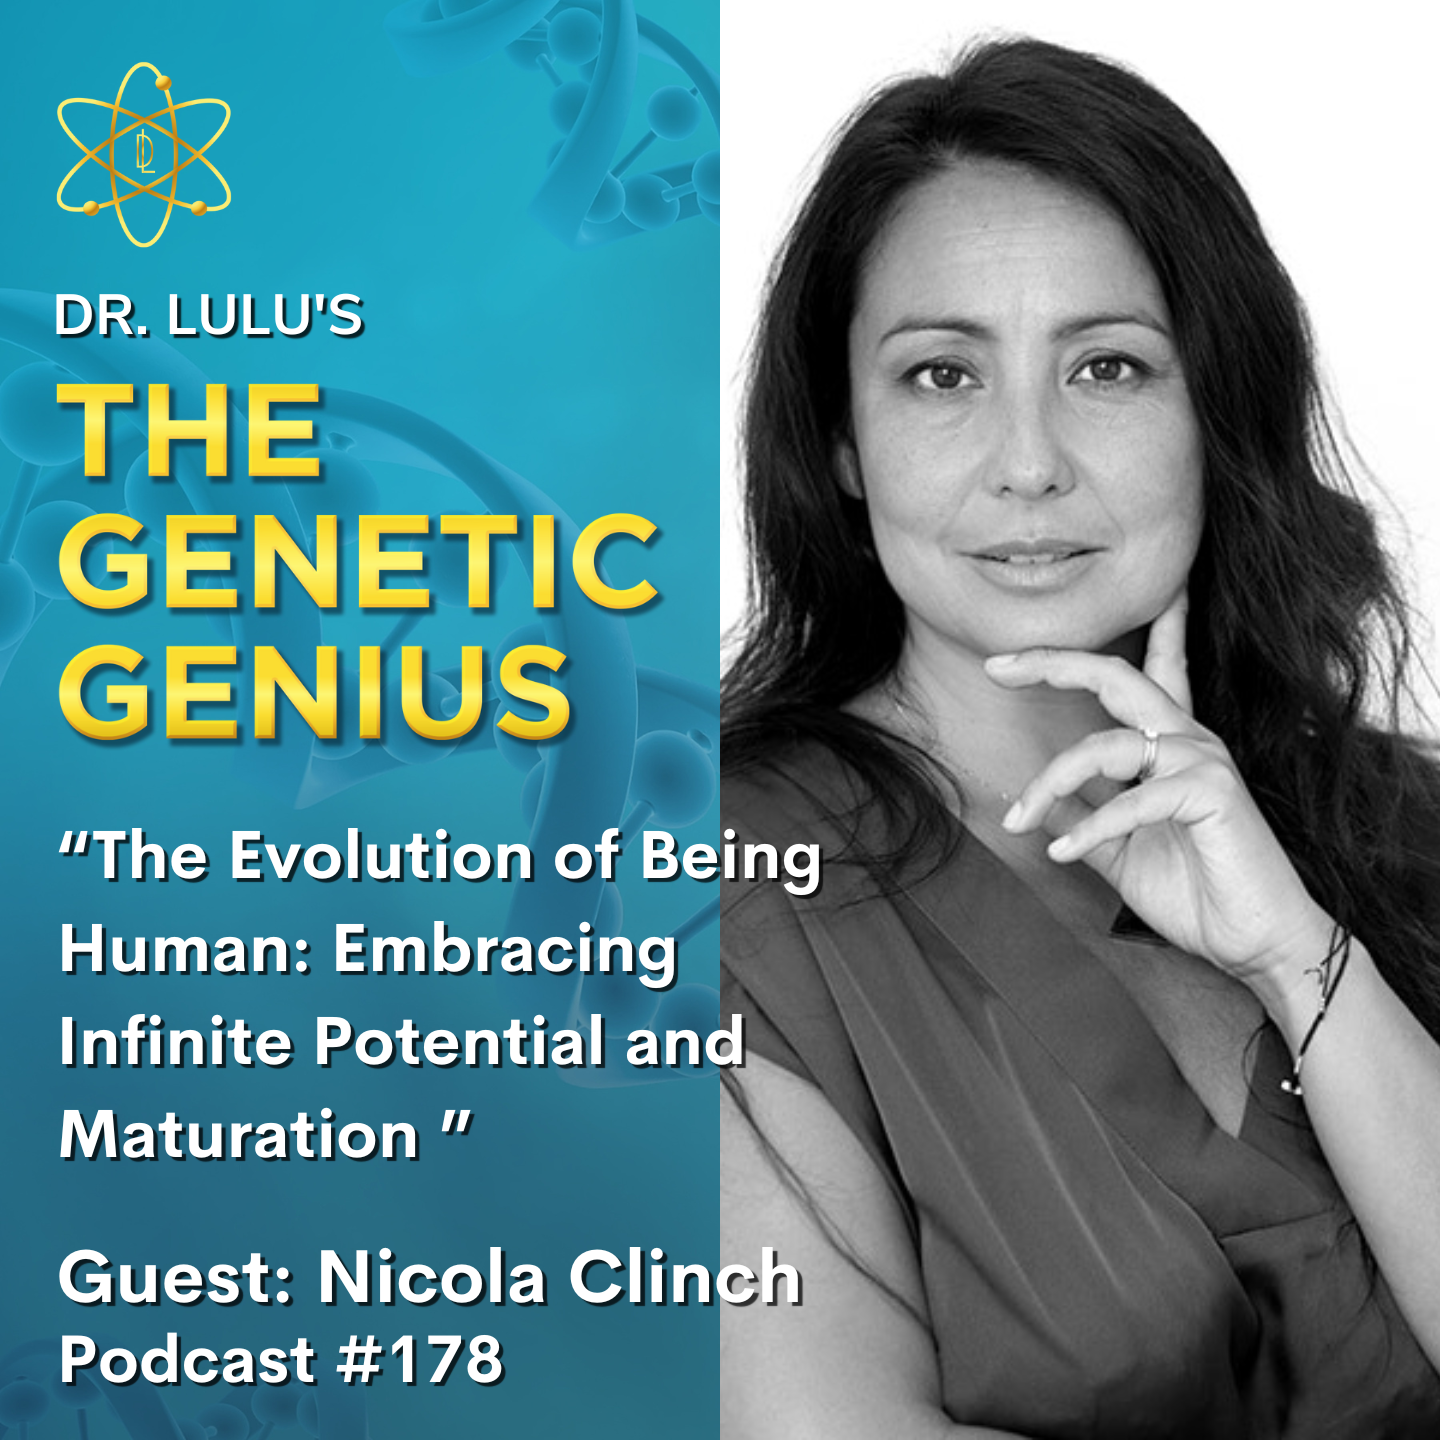 THE EVOLUTION OF BEING HUMAN: EMBRACING INFINITE POTENTIAL AND MATURATION WITH NICOLA CLINCH